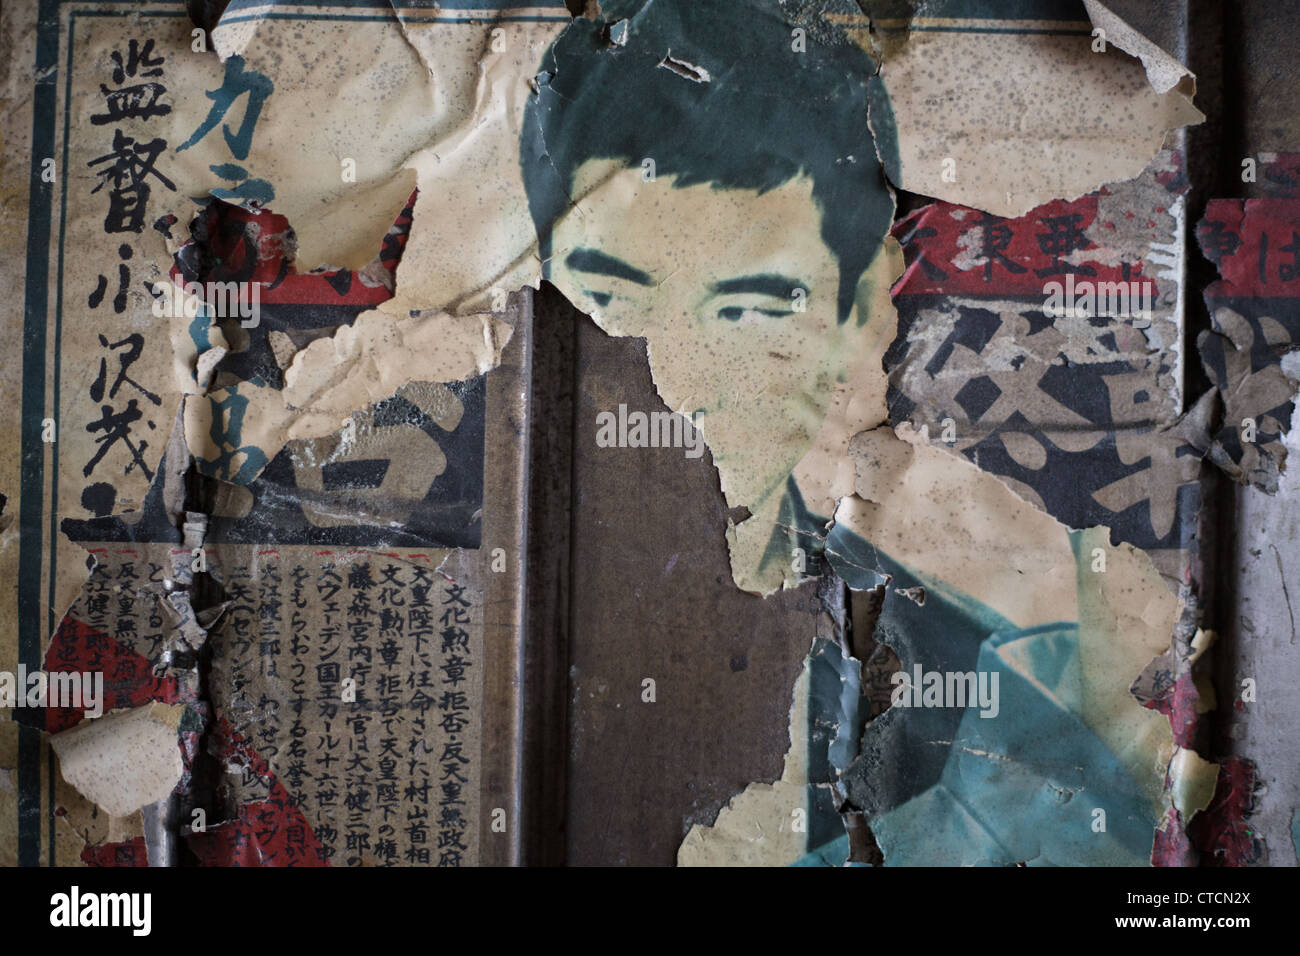 Old Japanese cinema movie film posters on a wall in Yurakucho district, Tokyo, Japan. Stock Photo